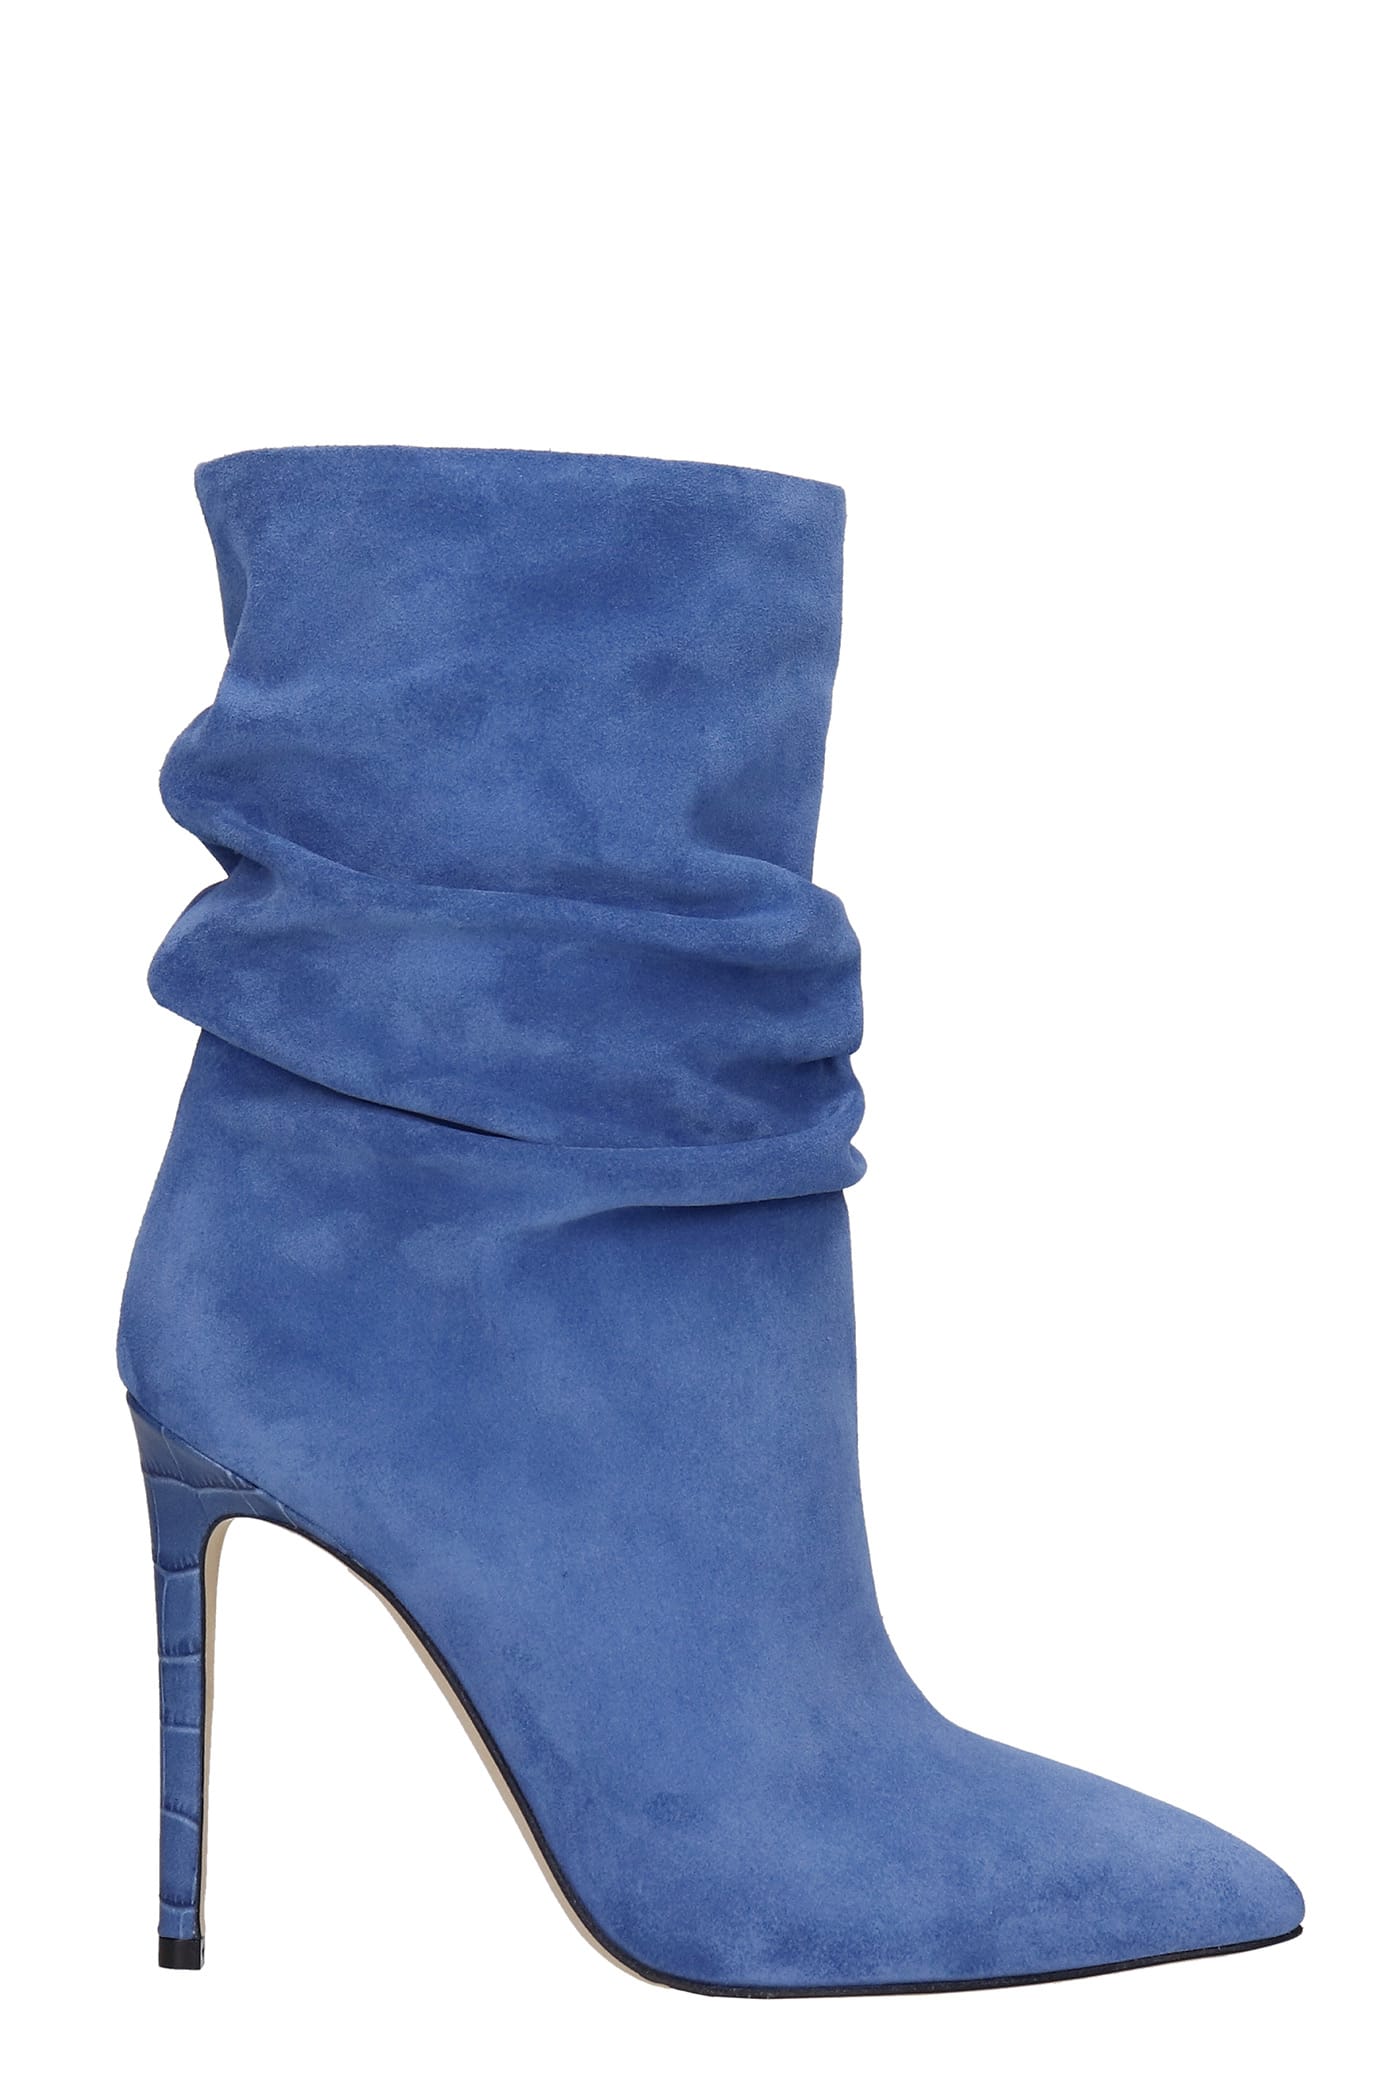 Paris Texas High Heels Ankle Boots In Blue Suede